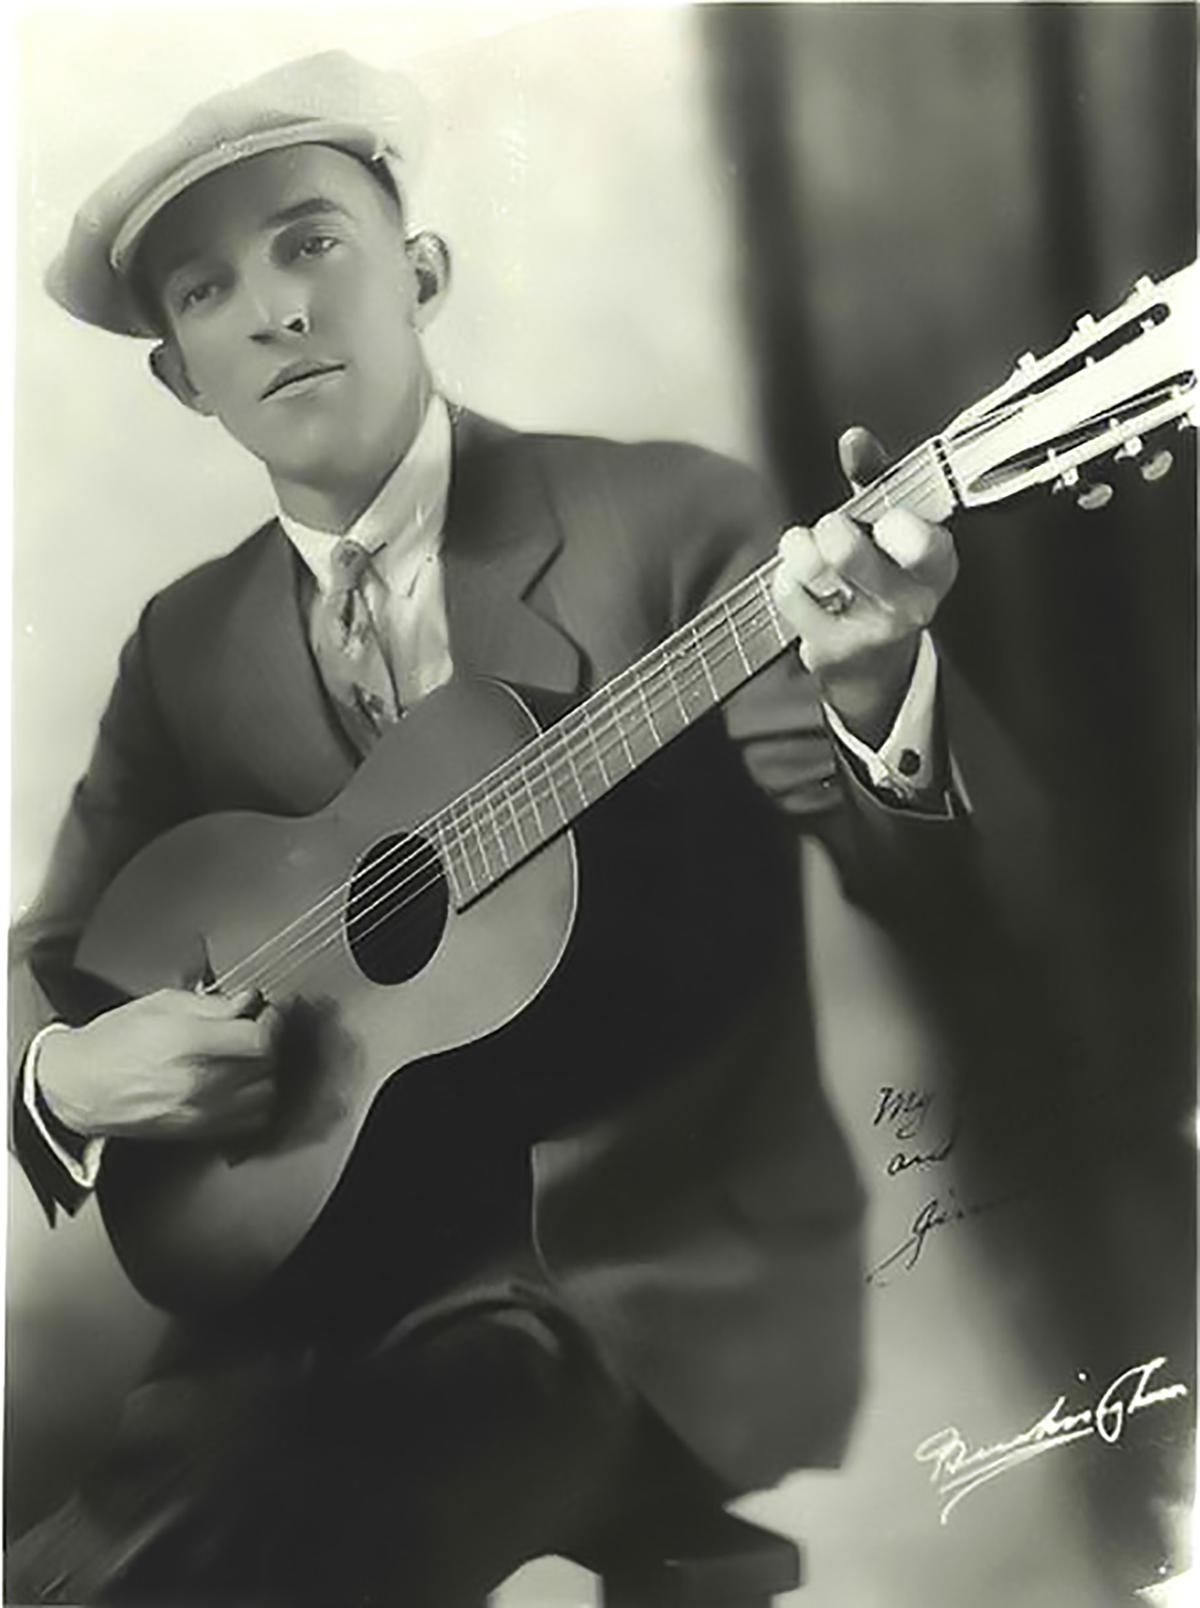 An early professional photo of Jimmie Rodgers posing with his guitar, circa 1921. (Public Domain)